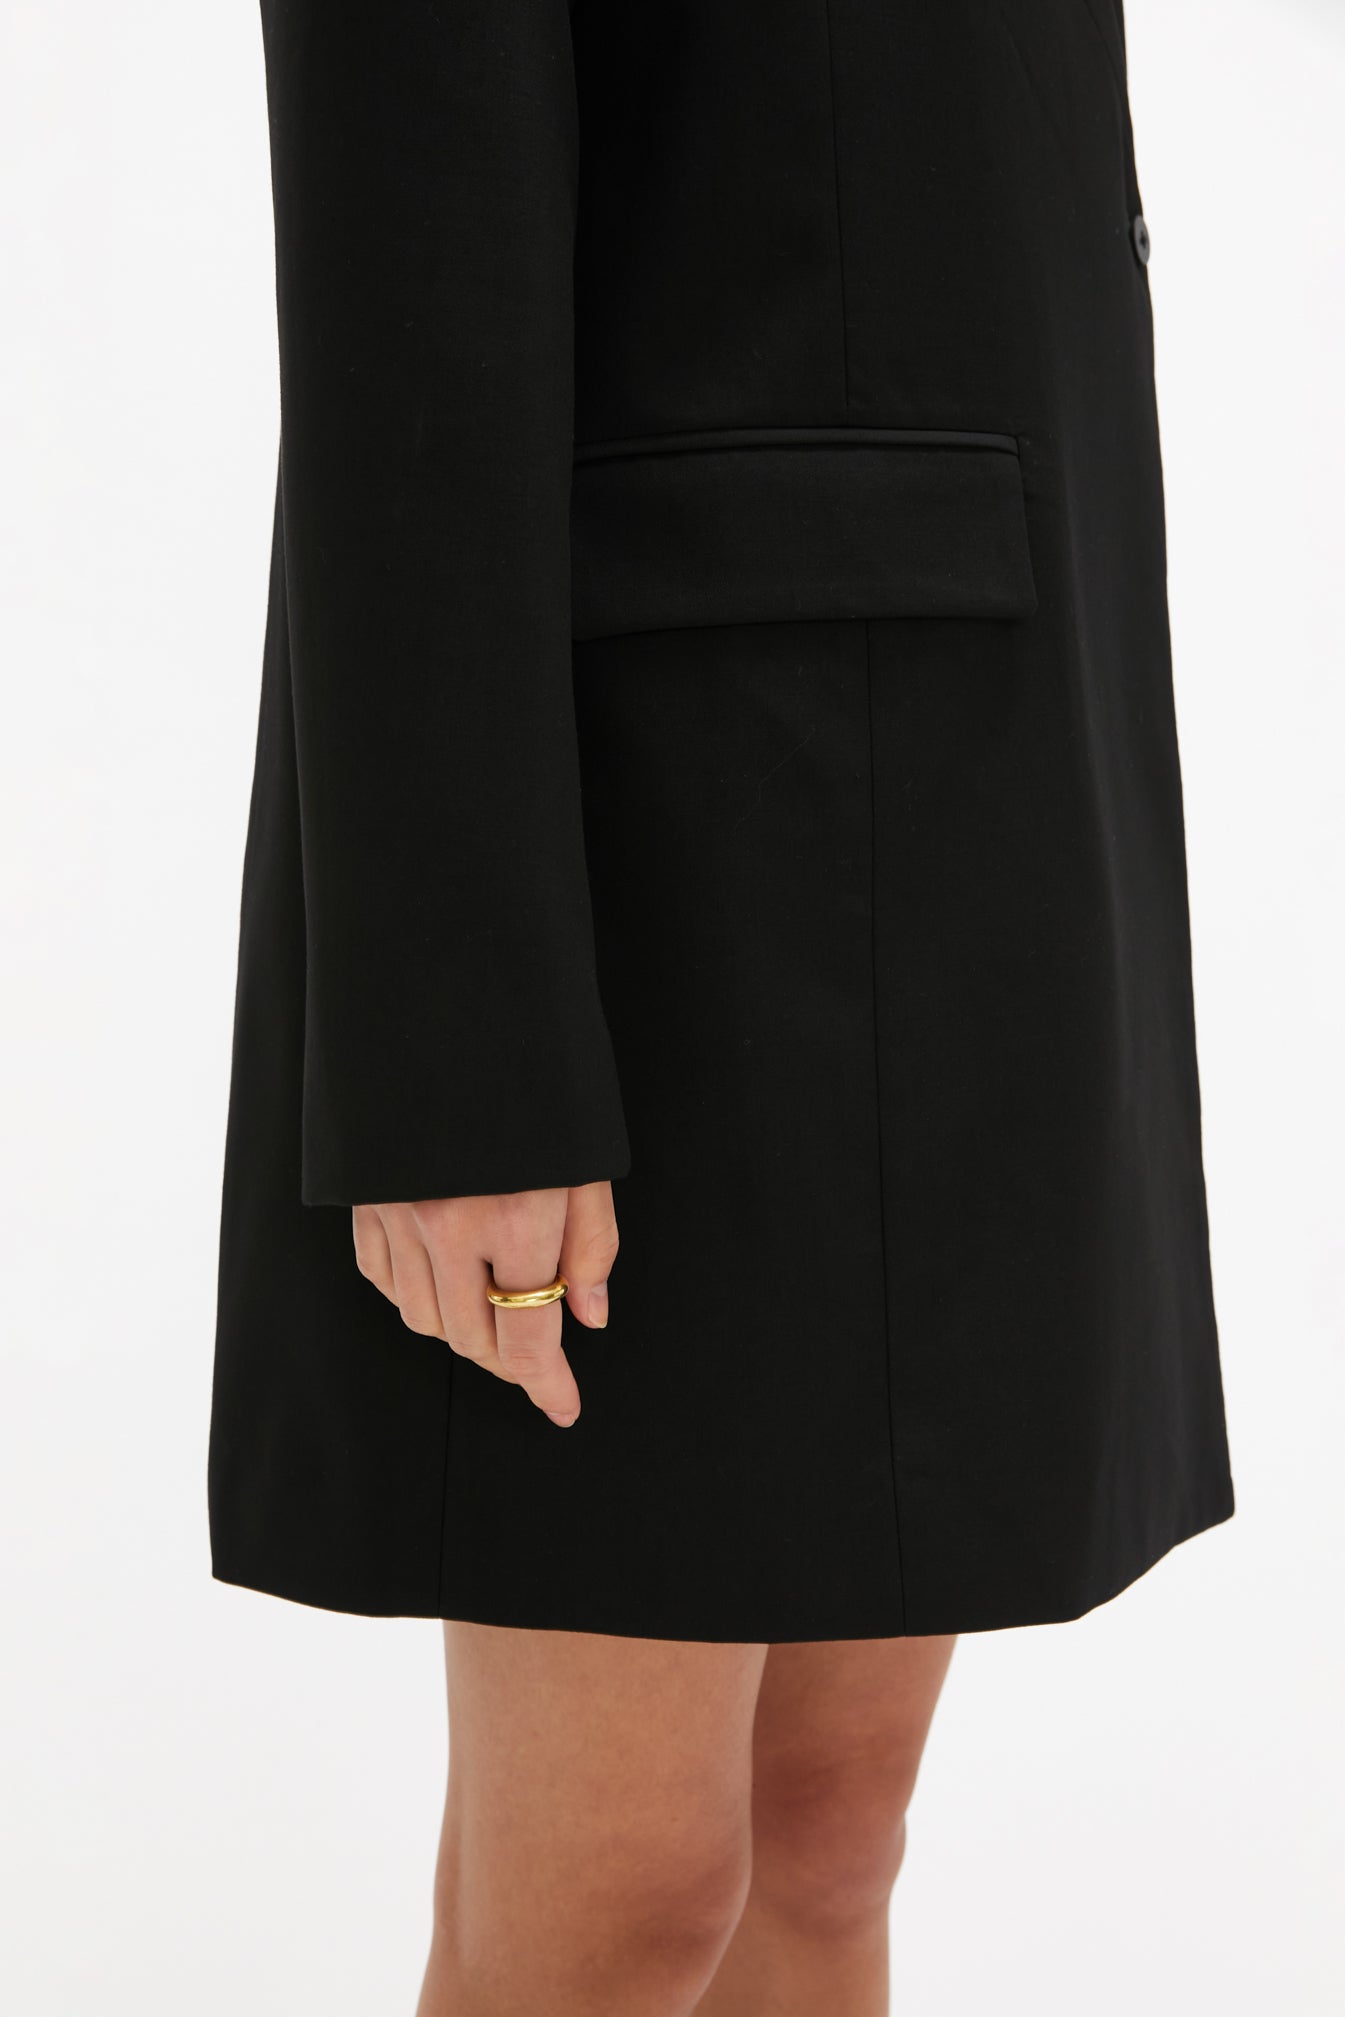 Classic Side Button Dress Coat In Black